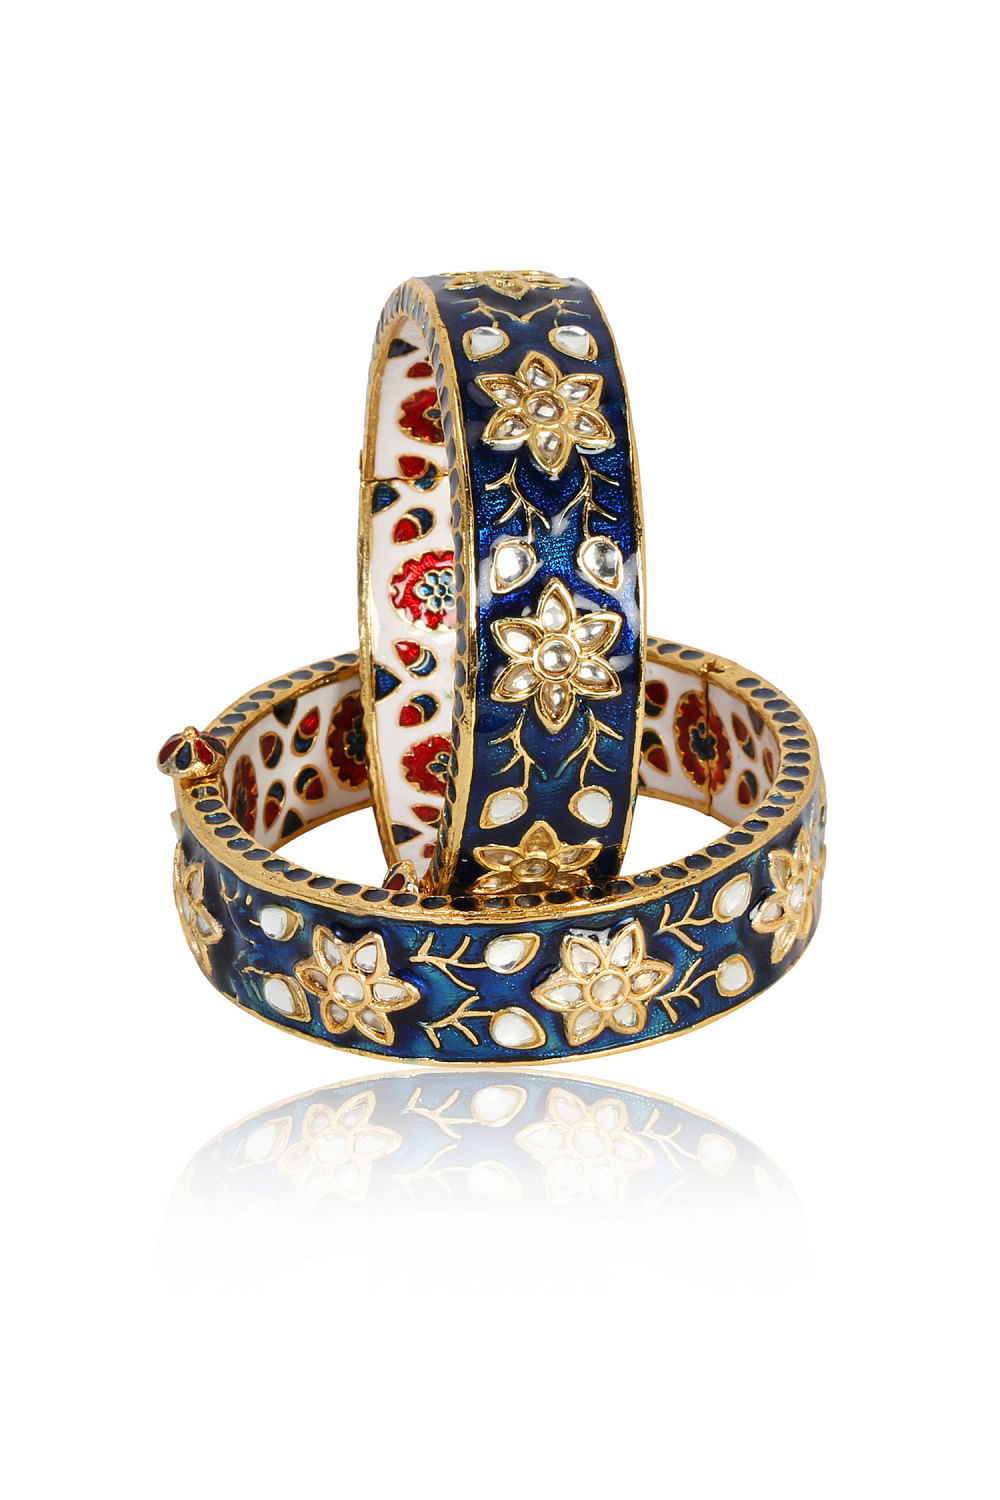 Exquisite Antique Meenakari Bangles, a true testament to the timeless  beauty of Indian craftsmanship